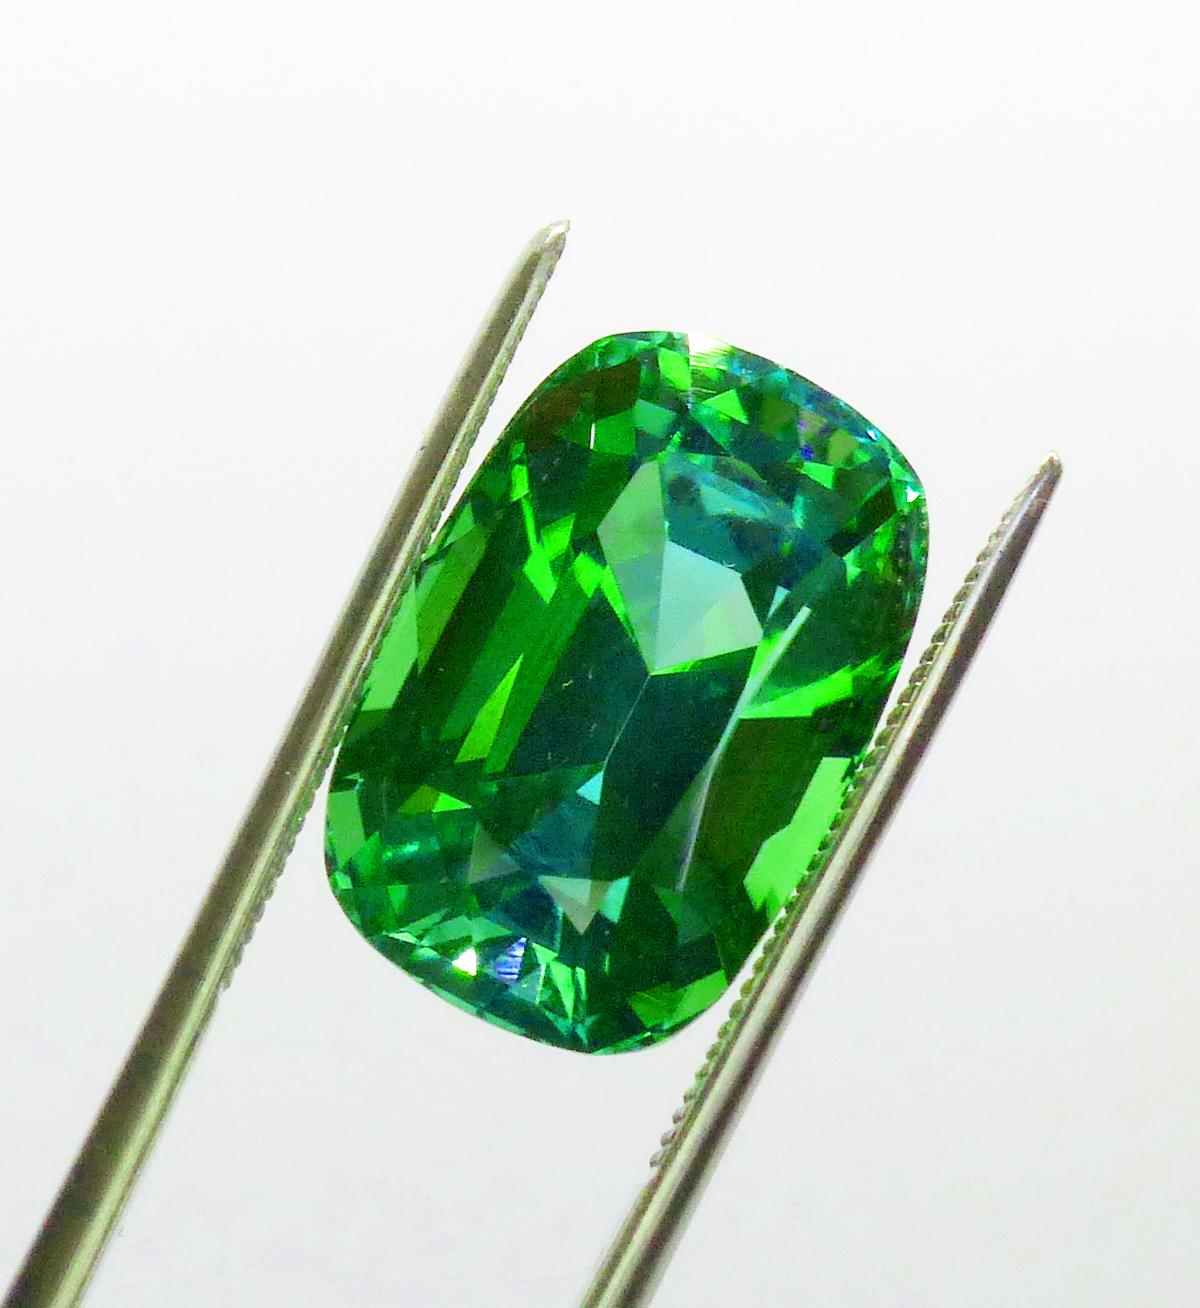 This is the find of 2020! With prices of fine quality rough in Tourmaline and other species, it has become unaffordable for anything on the larger side. We encountered this beauty unexpectedly, as it was already faceted with a nice polish and